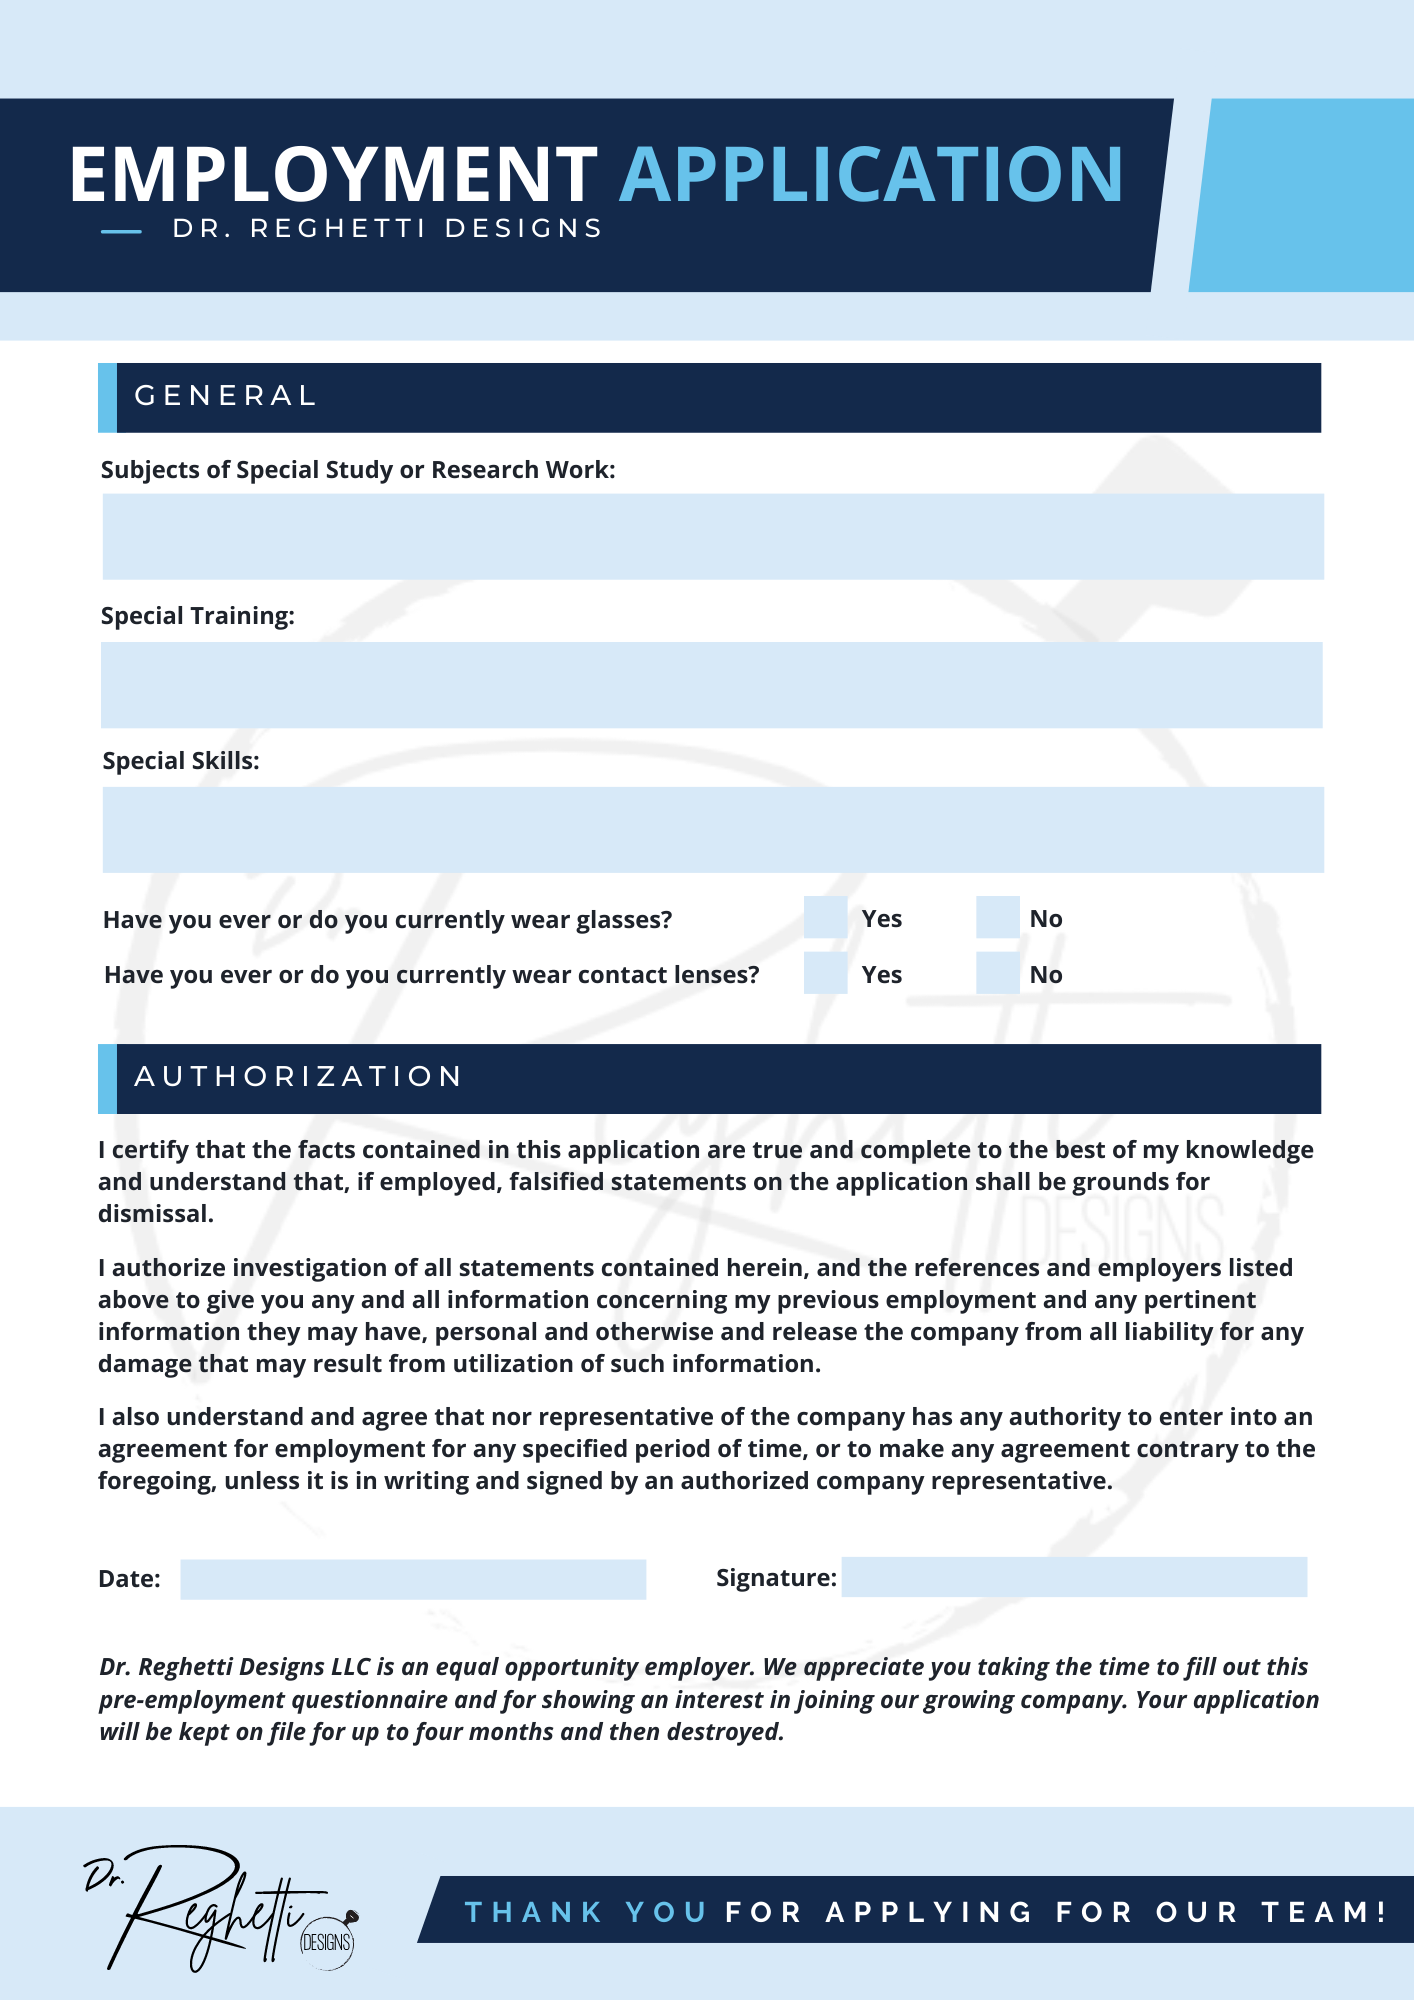 employment application for optometry private practice